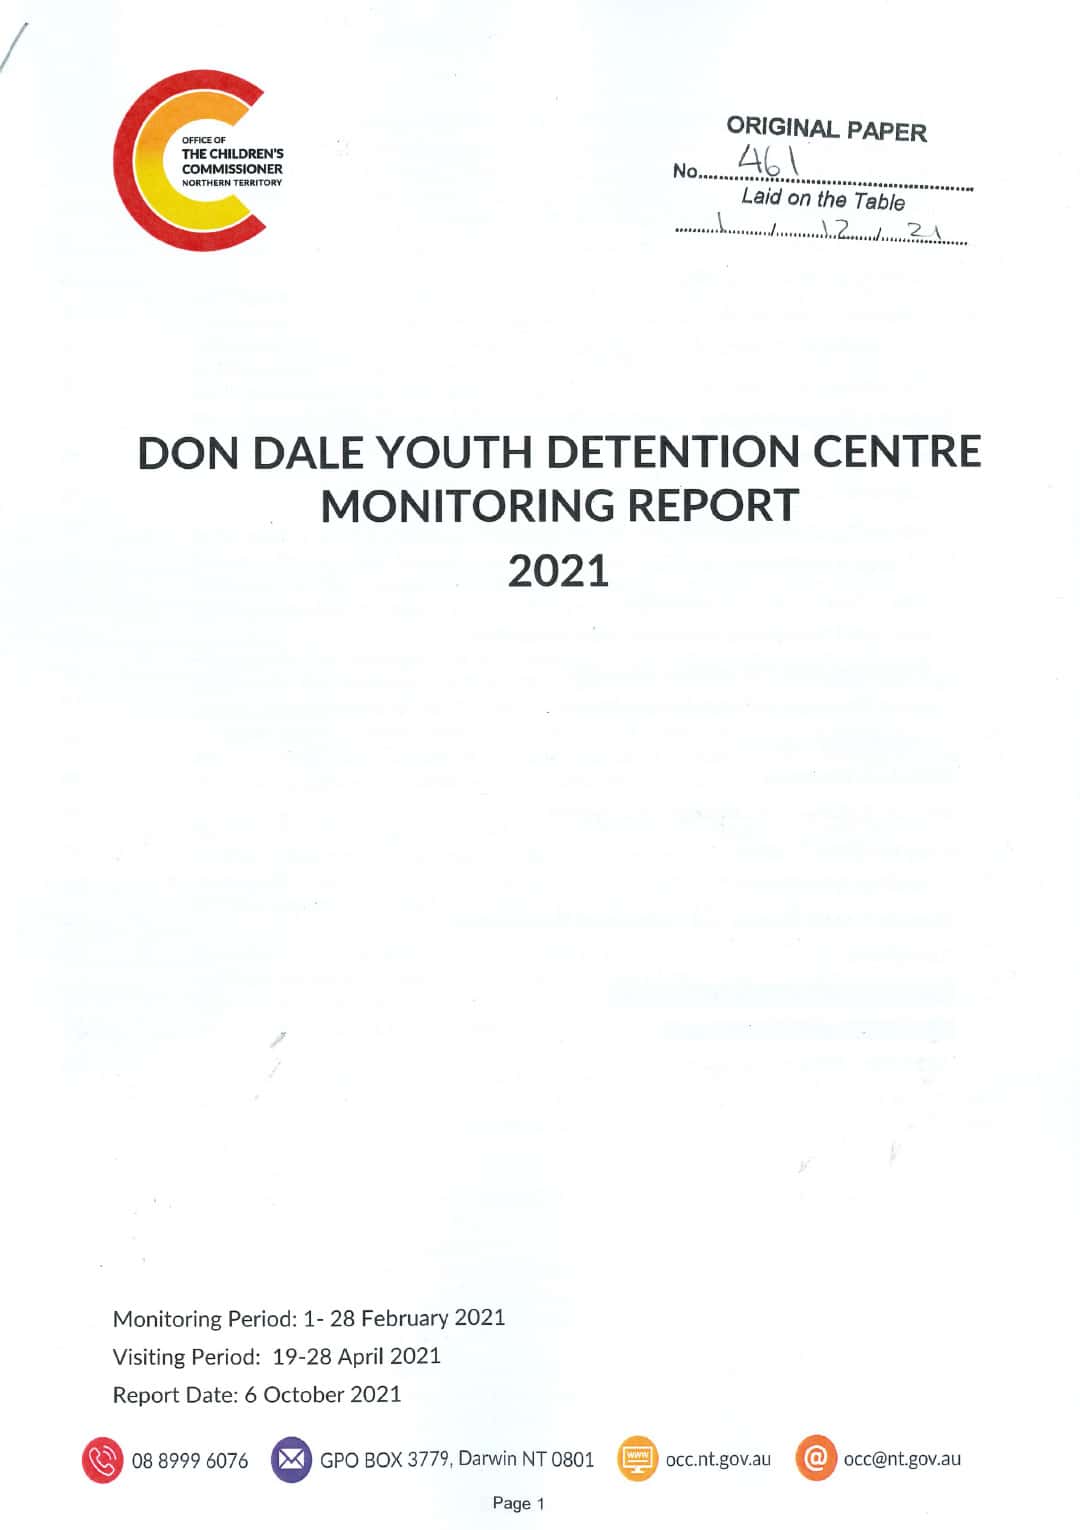 2021 Don Dale Youth Detention Center - Monitoring Report